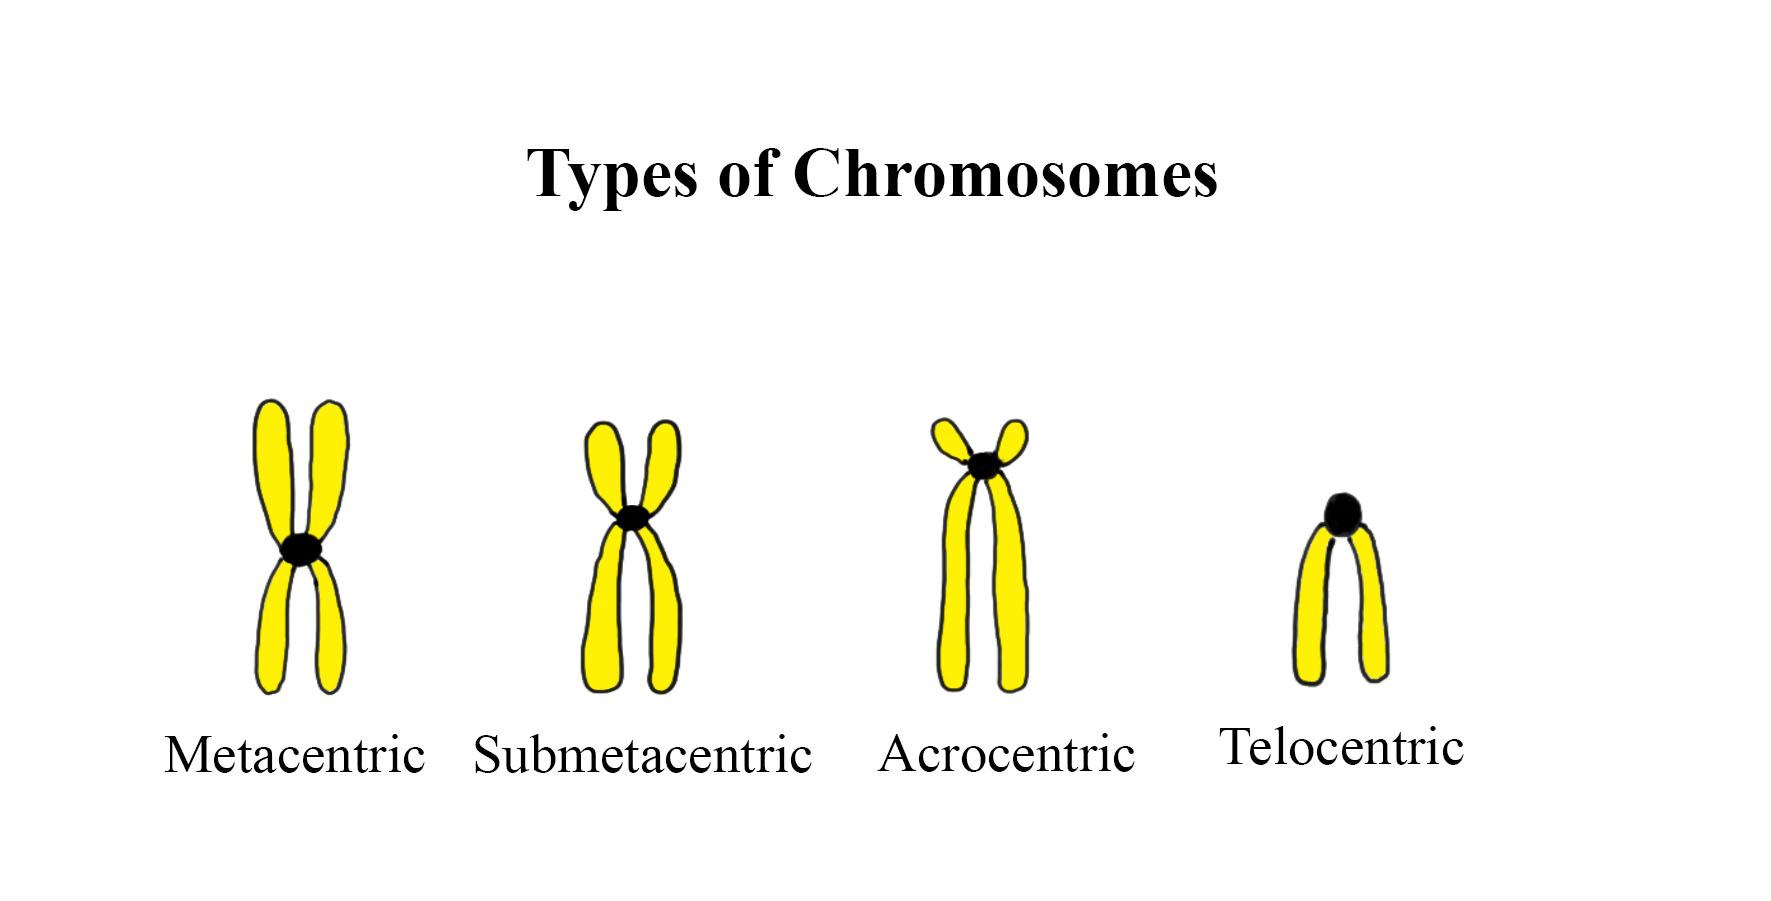 Chromosome Classification Based On Position Of Centromere And Function